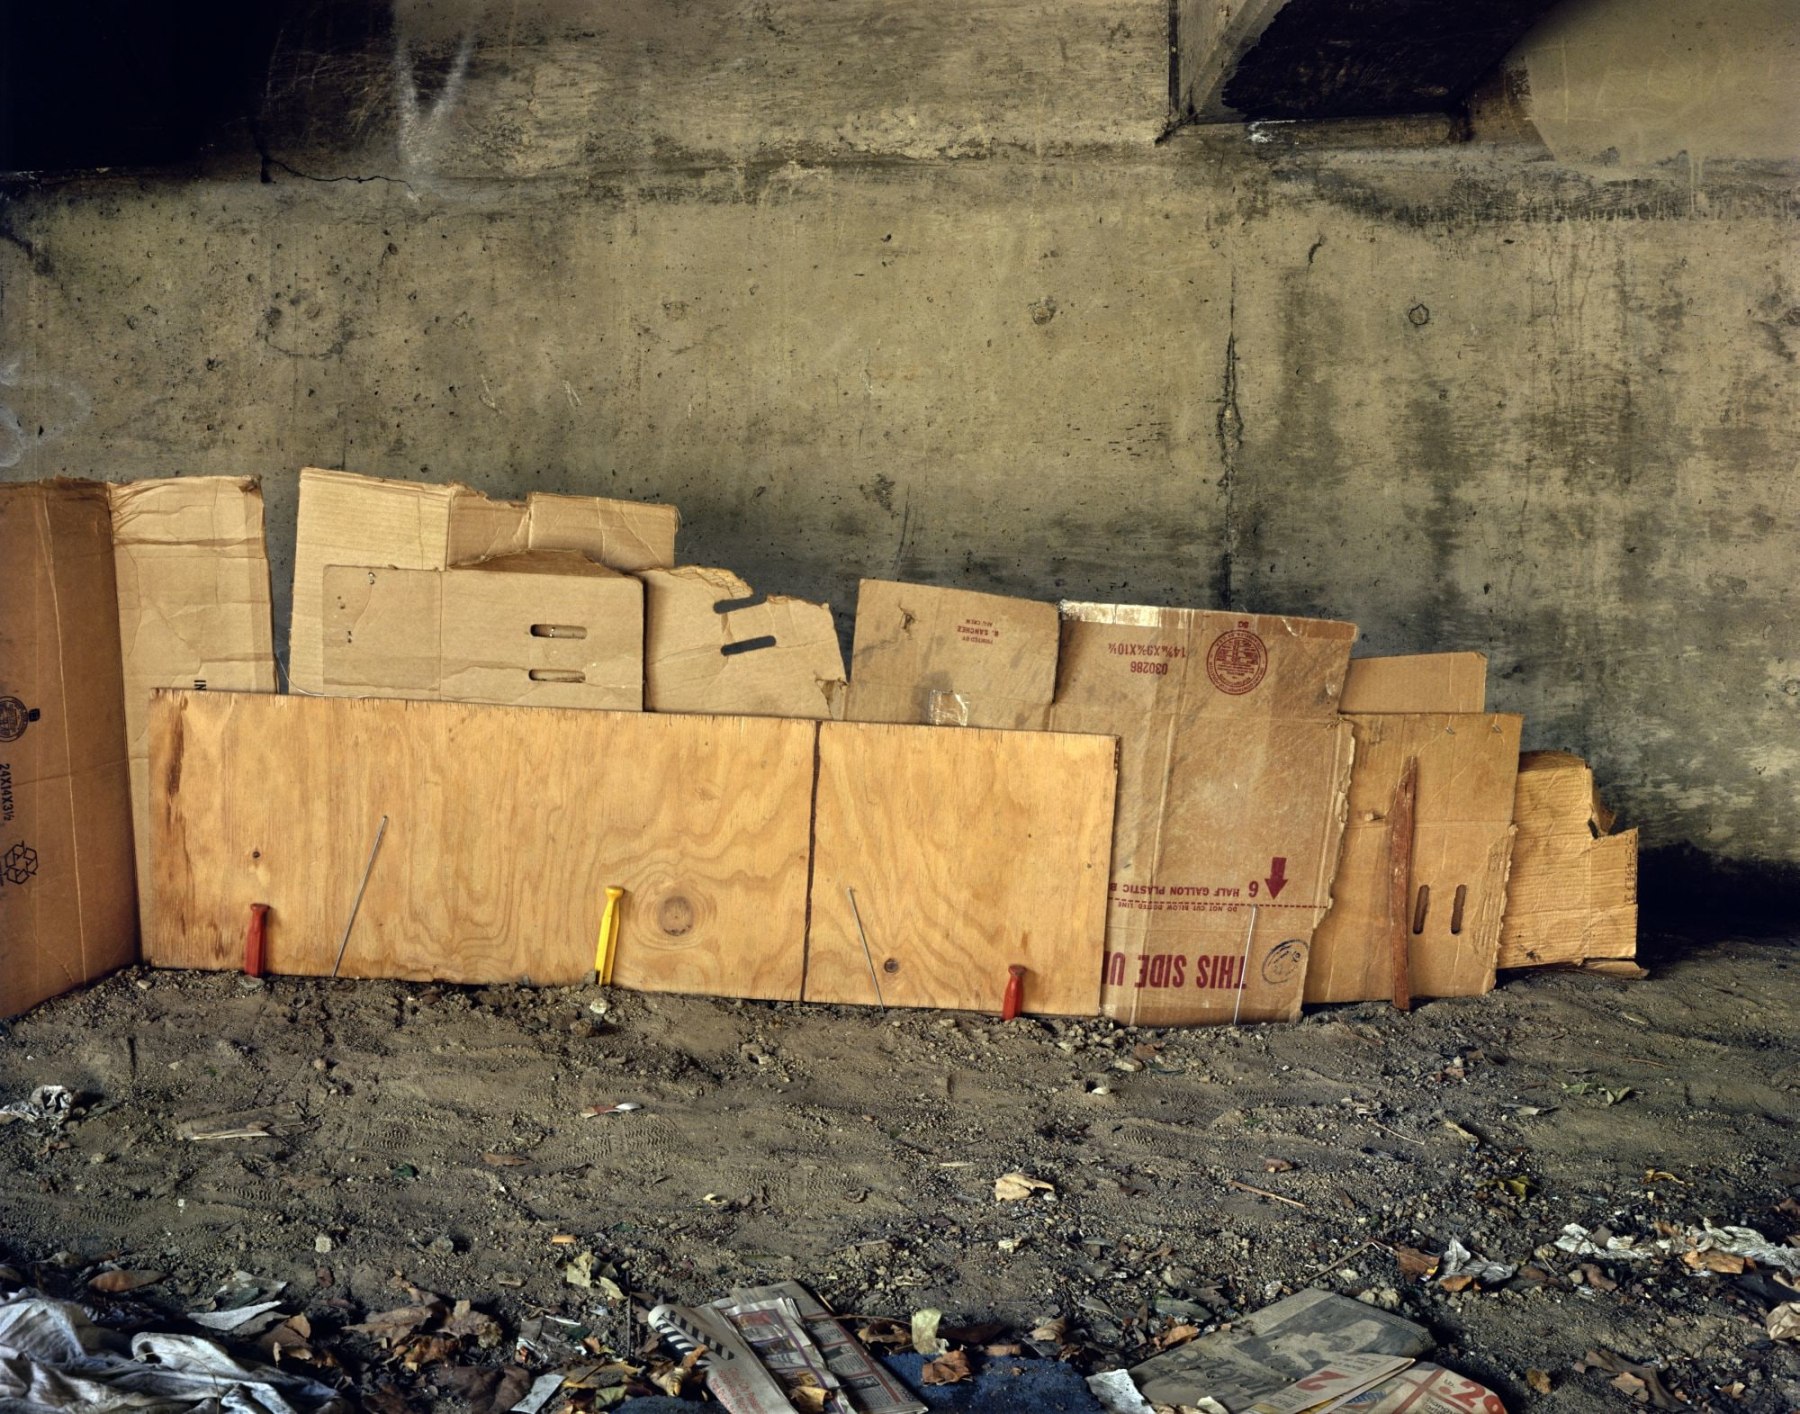 Landscapes for the Homeless #15, 1989, 40 x 50 inches, archival pigment print&nbsp;